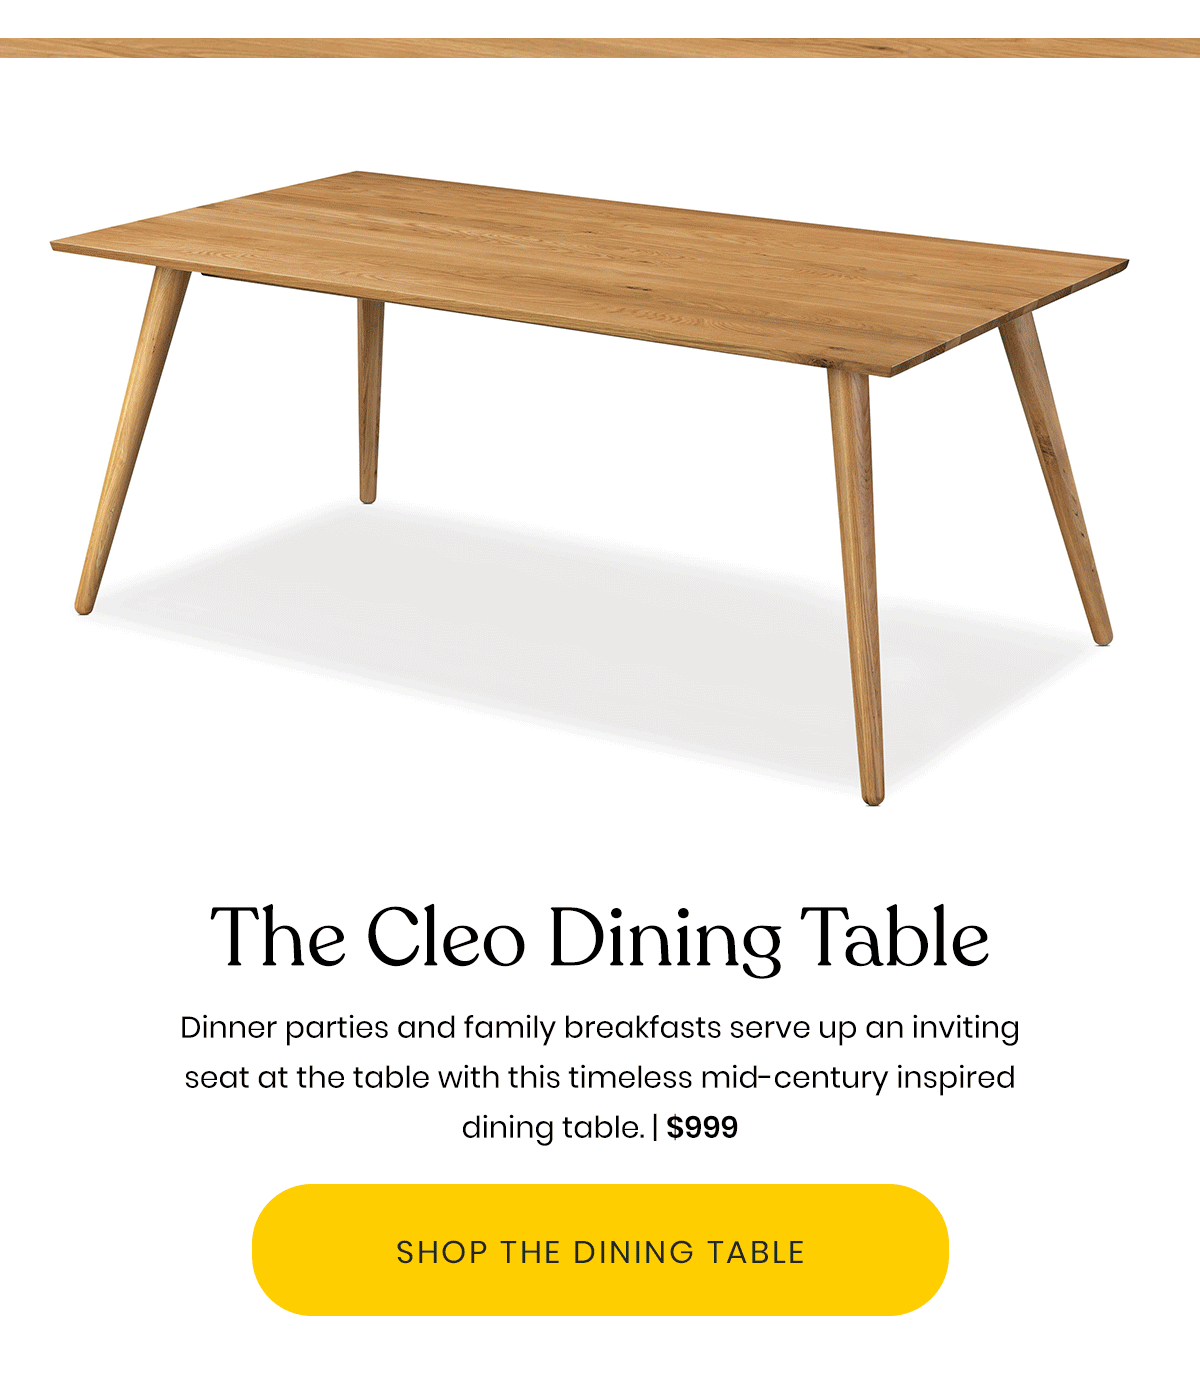 The Cleo Dining Table | Dinner parties and family breakfasts serve up an inviting seat at the table with this timeless mid-century inspired dining table. | $999 | Shop The Dining Table